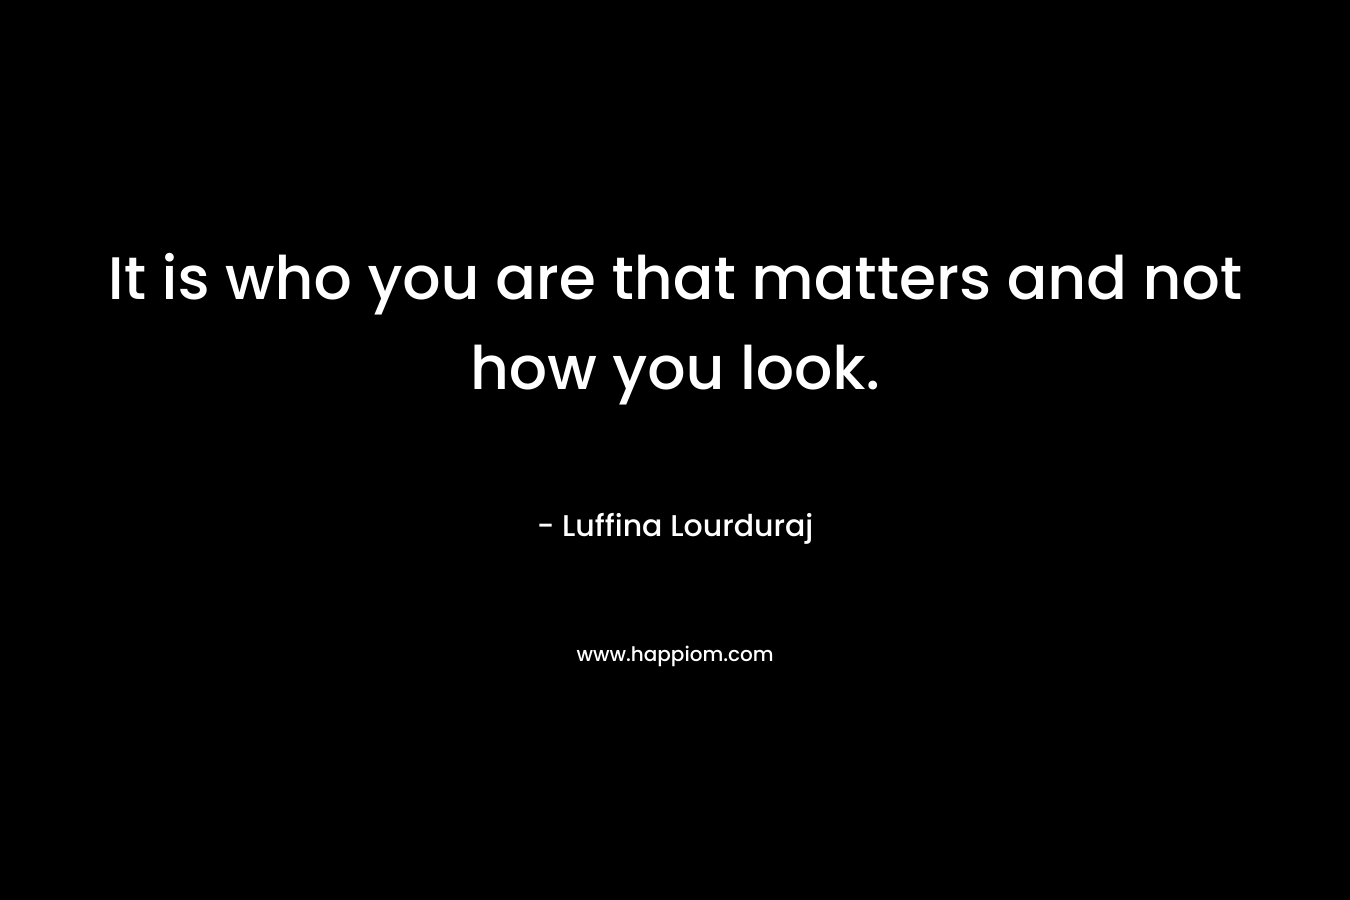 It is who you are that matters and not how you look.